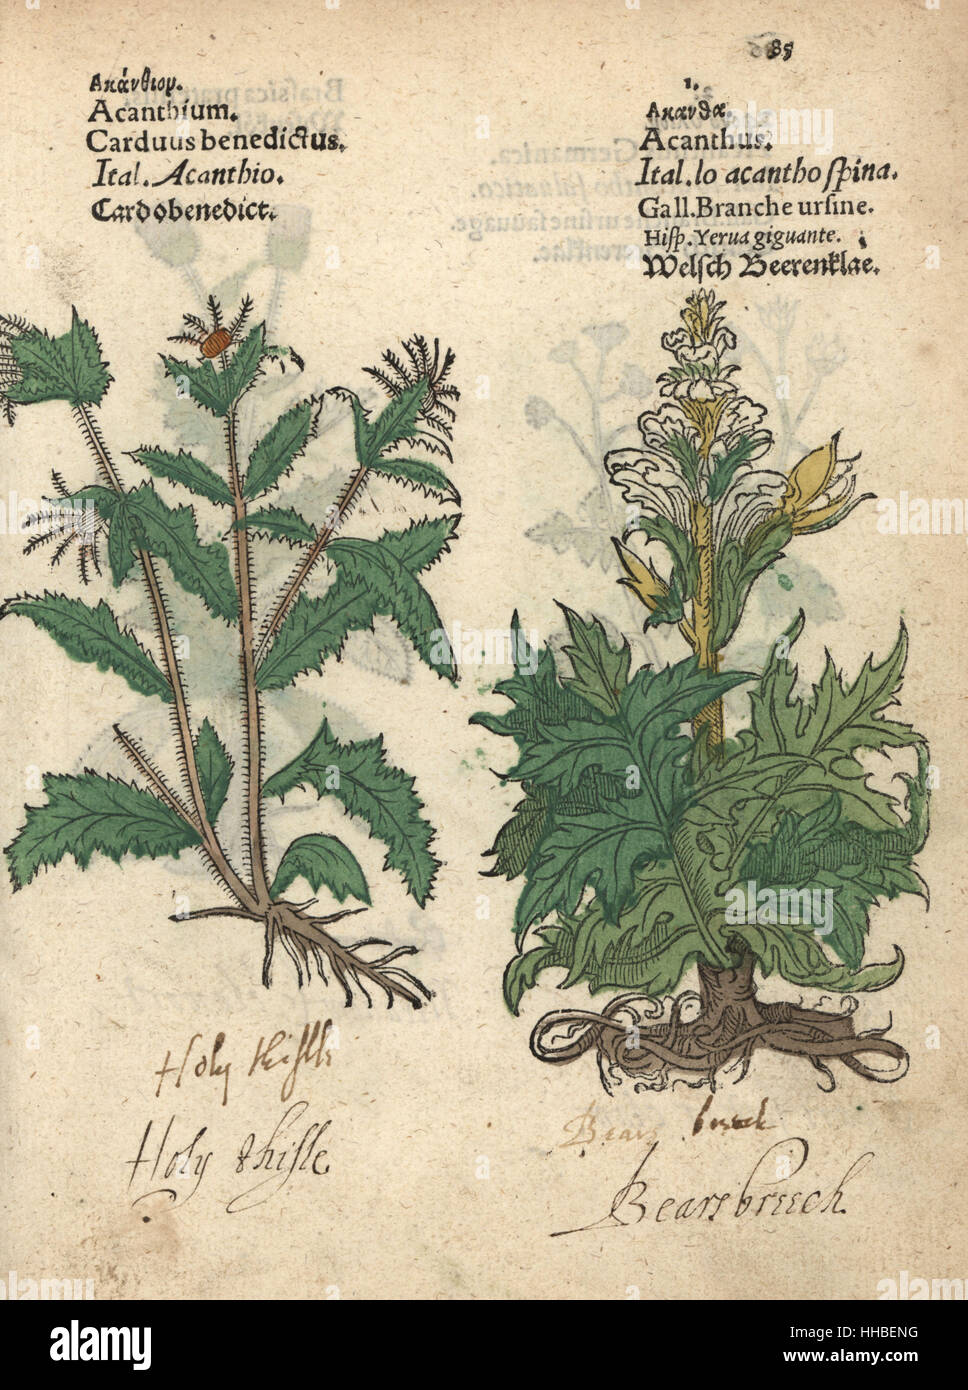 Blessed thistle, Carduus benedictus, and bear's breeches, Acanthus spinosus. Handcoloured woodblock engraving of a botanical illustration from Adam Lonicer's Krauterbuch, or Herbal, Frankfurt, 1557. This from a 17th century pirate edition or atlas of illustrations only, with captions in Latin, Greek, French, Italian, German, and in English manuscript. Stock Photo